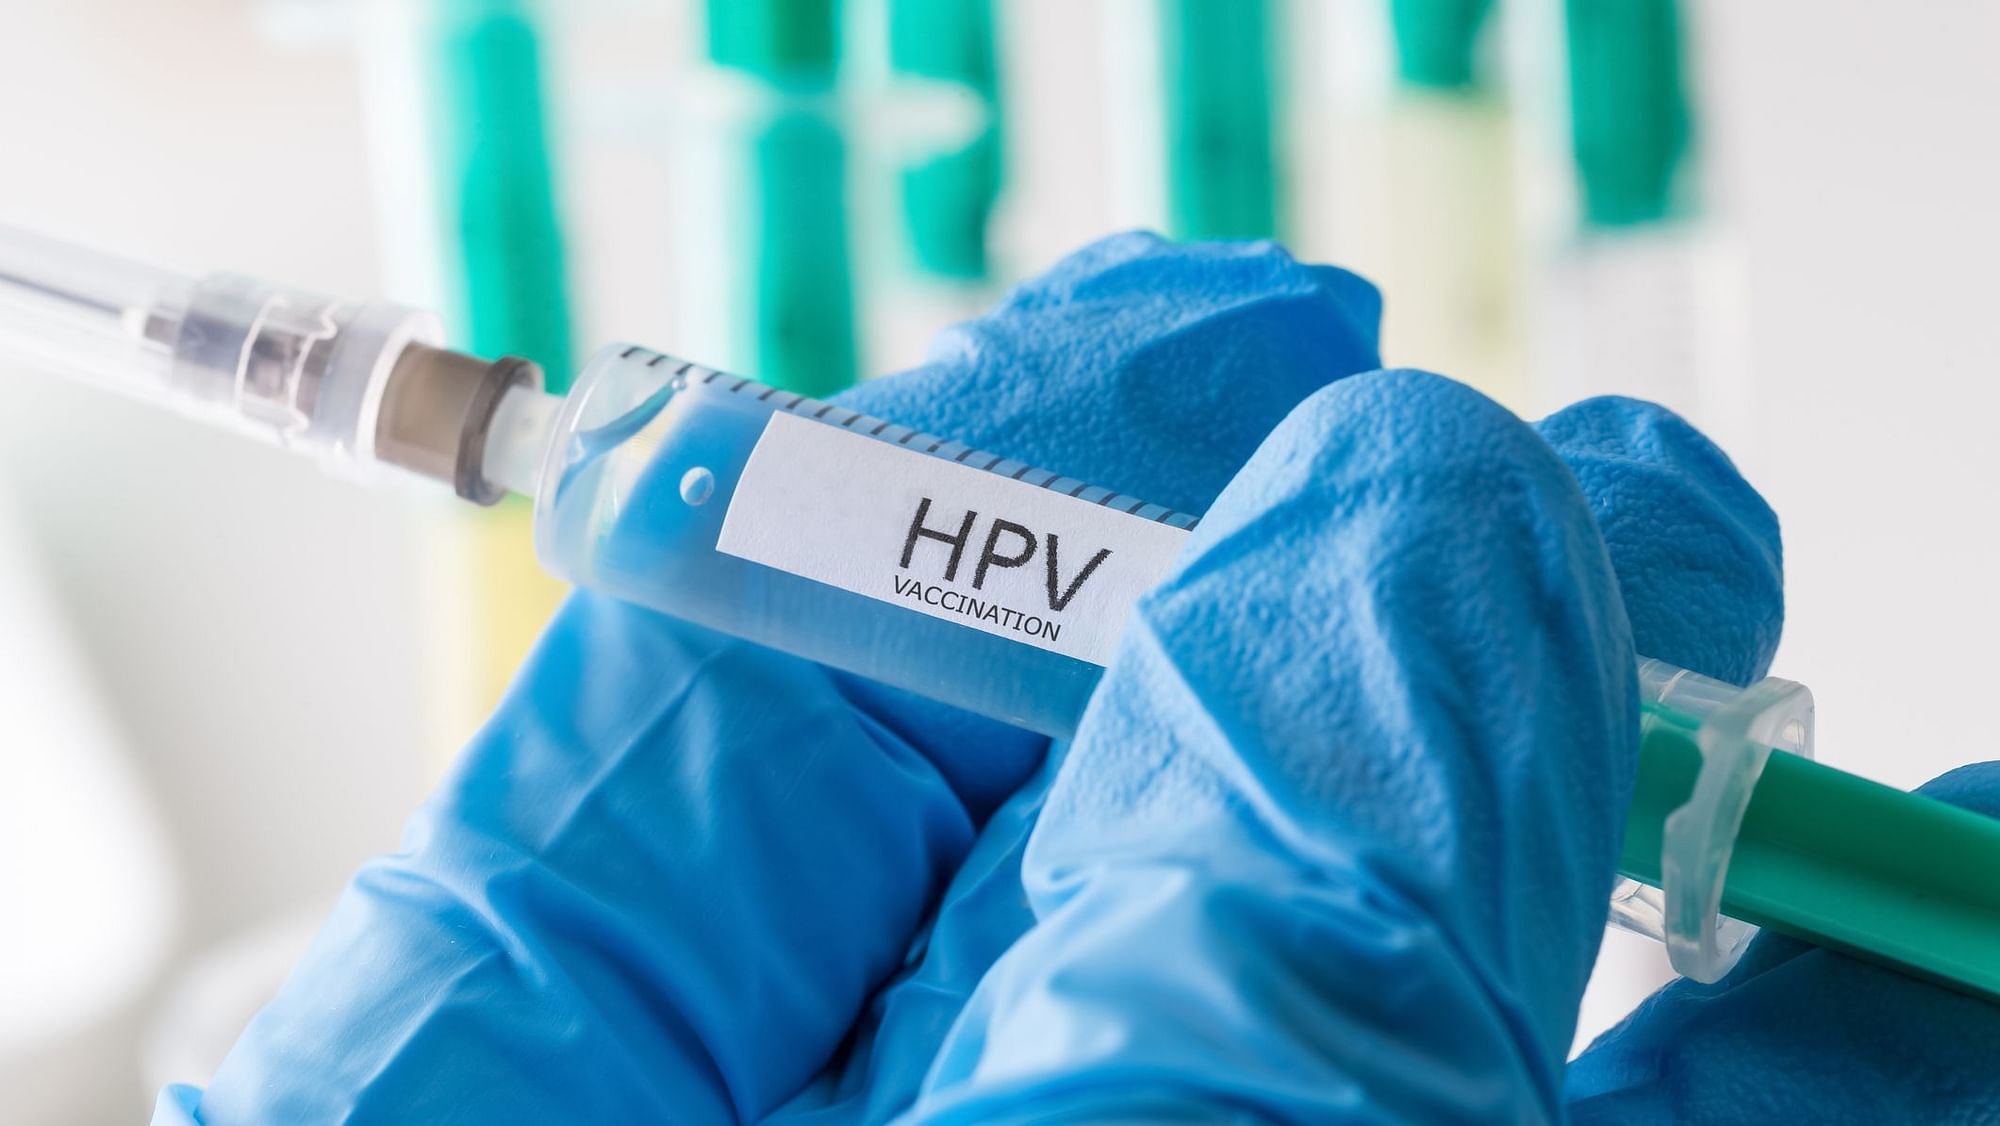 HPV is the most common sexually-transmitted infection (STD) globally. Most people are infected at some point in their lives.